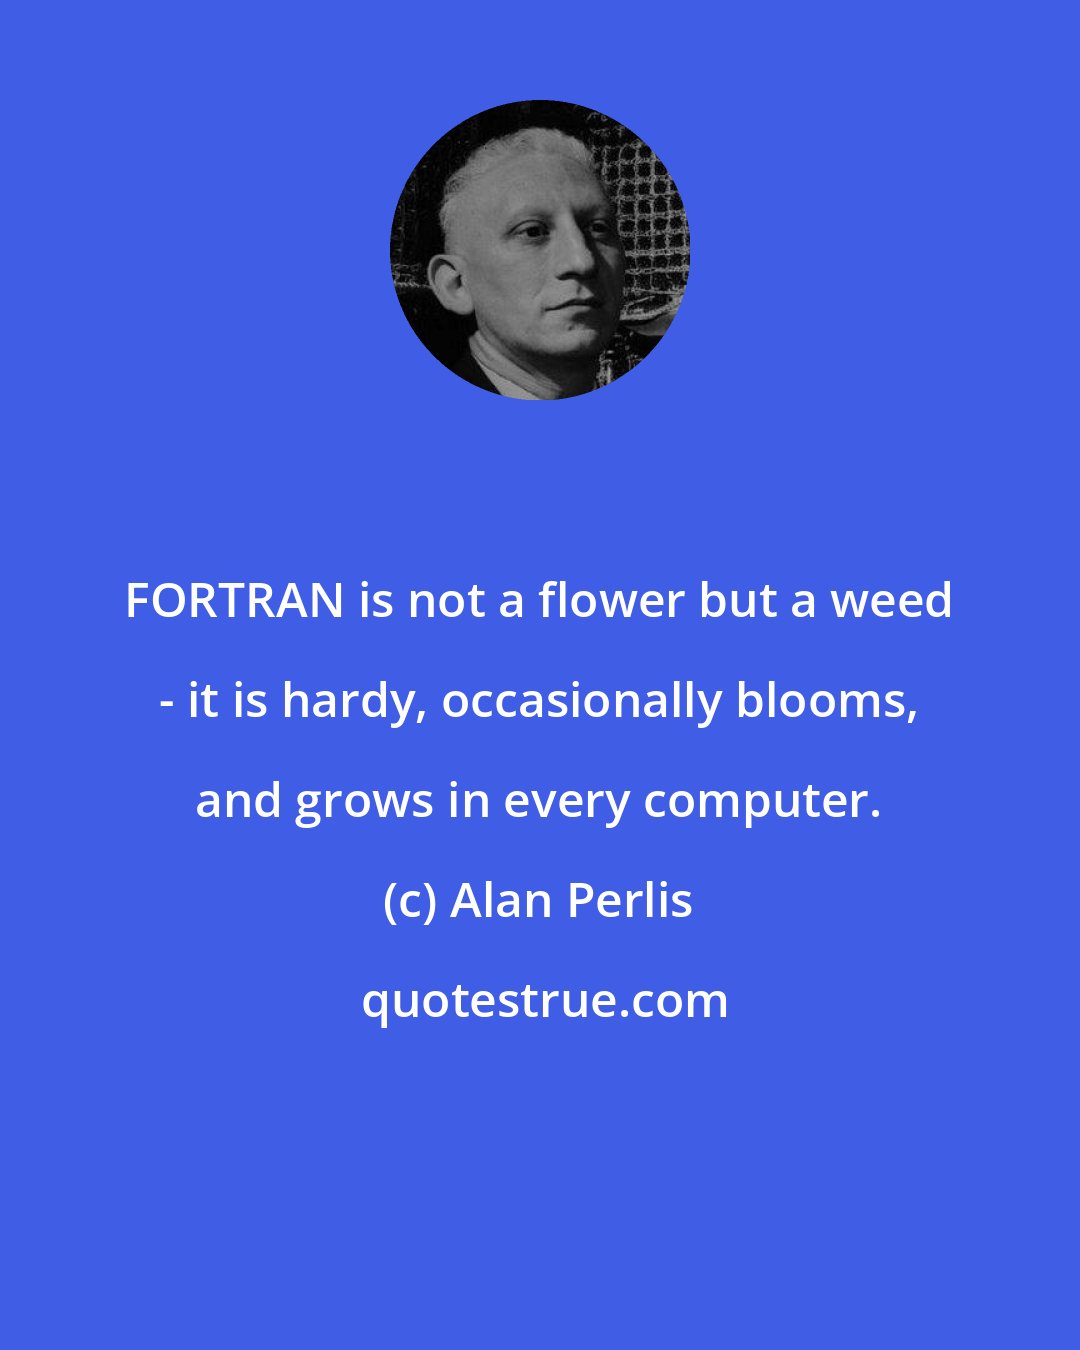 Alan Perlis: FORTRAN is not a flower but a weed - it is hardy, occasionally blooms, and grows in every computer.